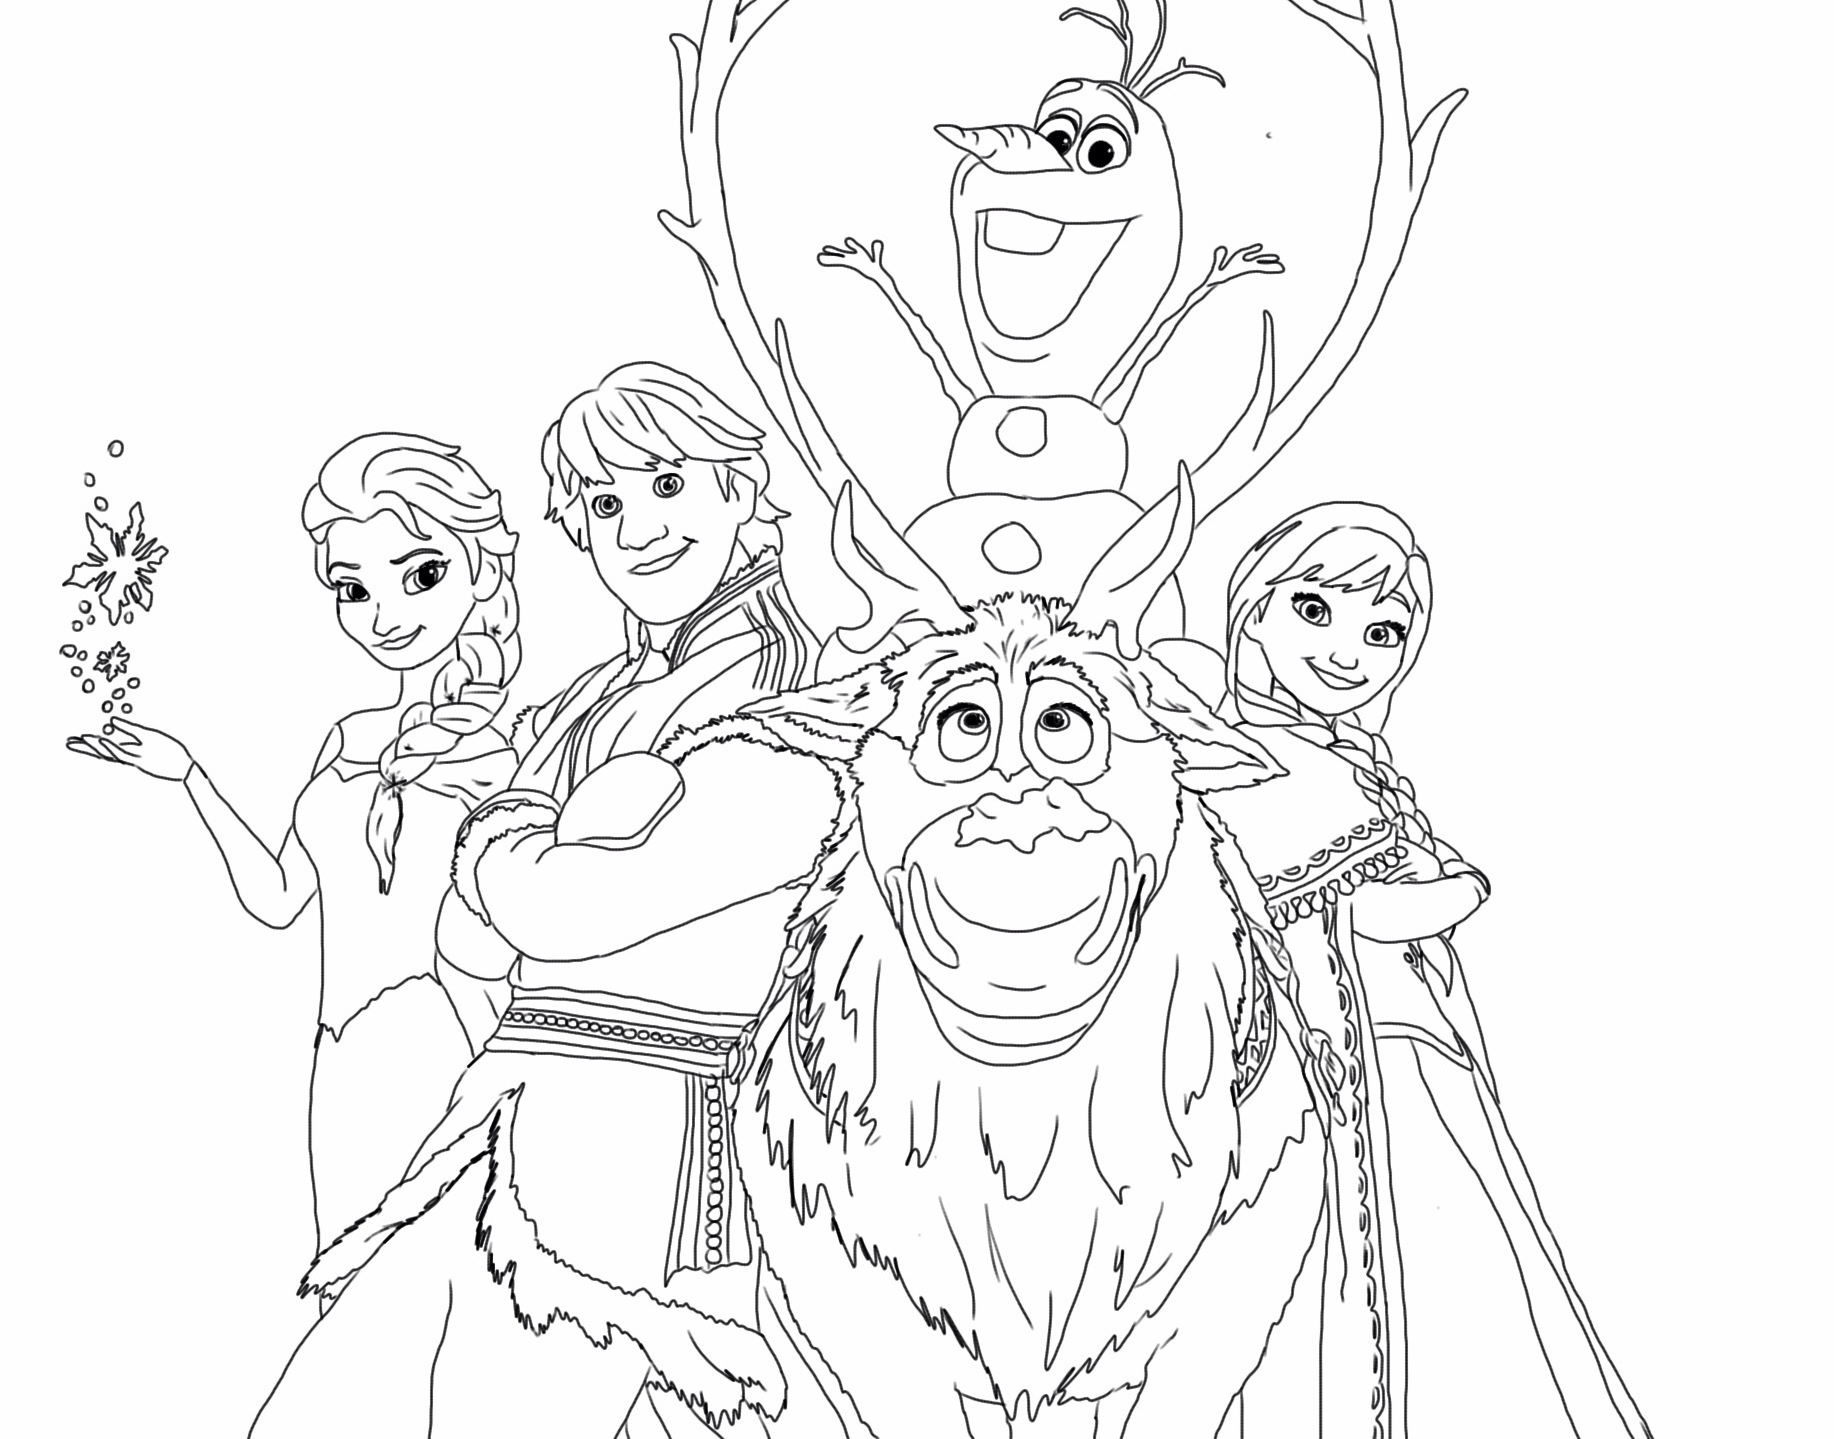 Coloring Pages : Frozen Happy Family Free Coloring Page Disney Kids - Free Printable Coloring Pages Disney Frozen